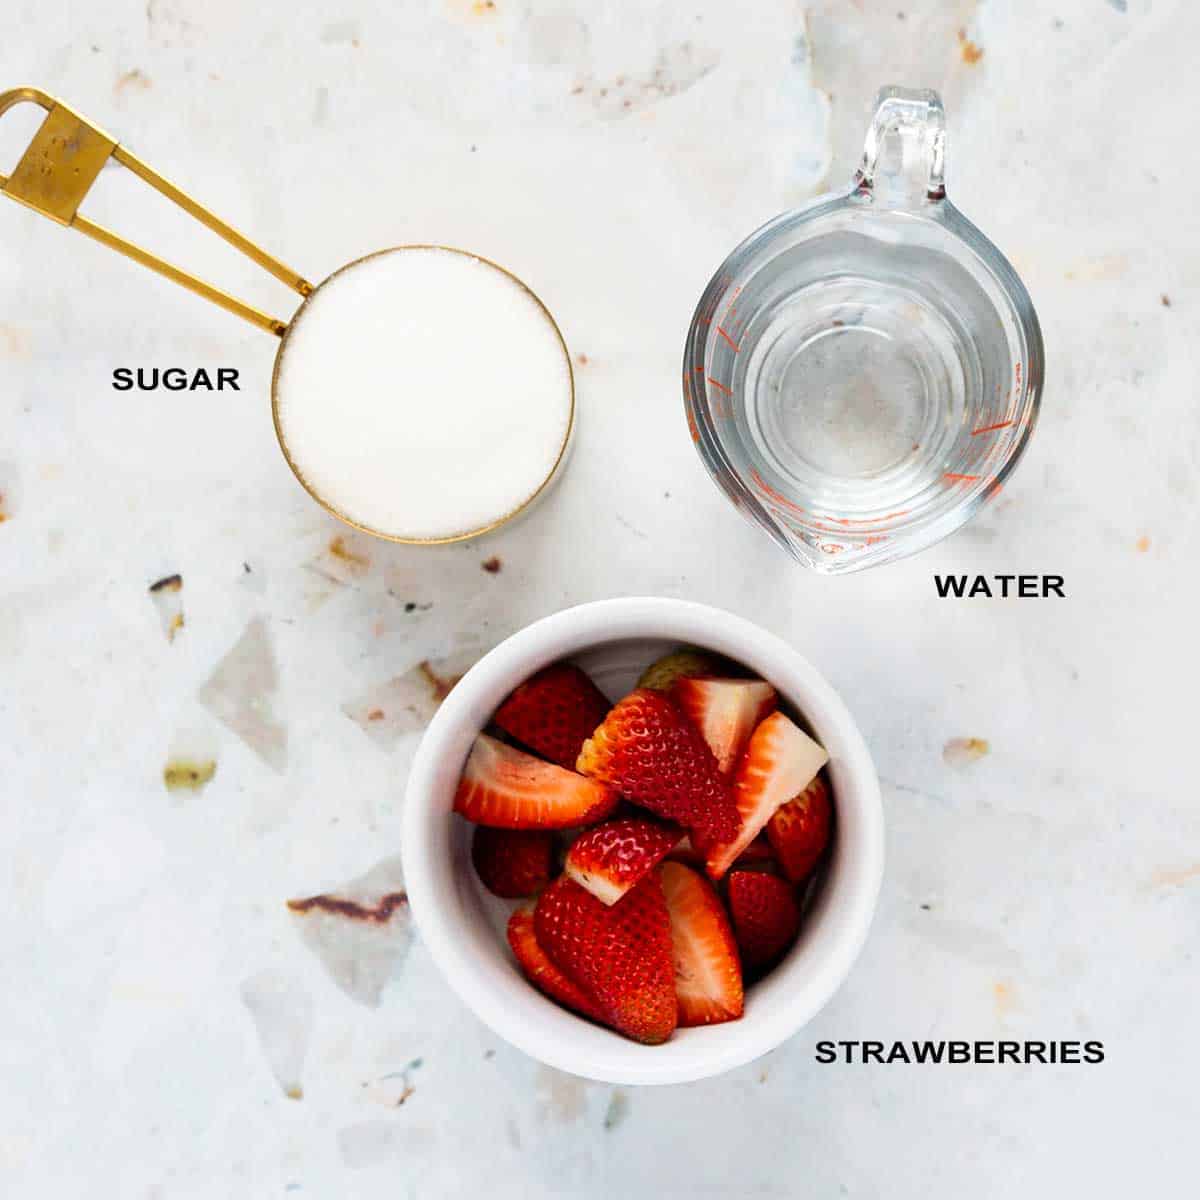 Ingredients for strawberry syrup on white counter.